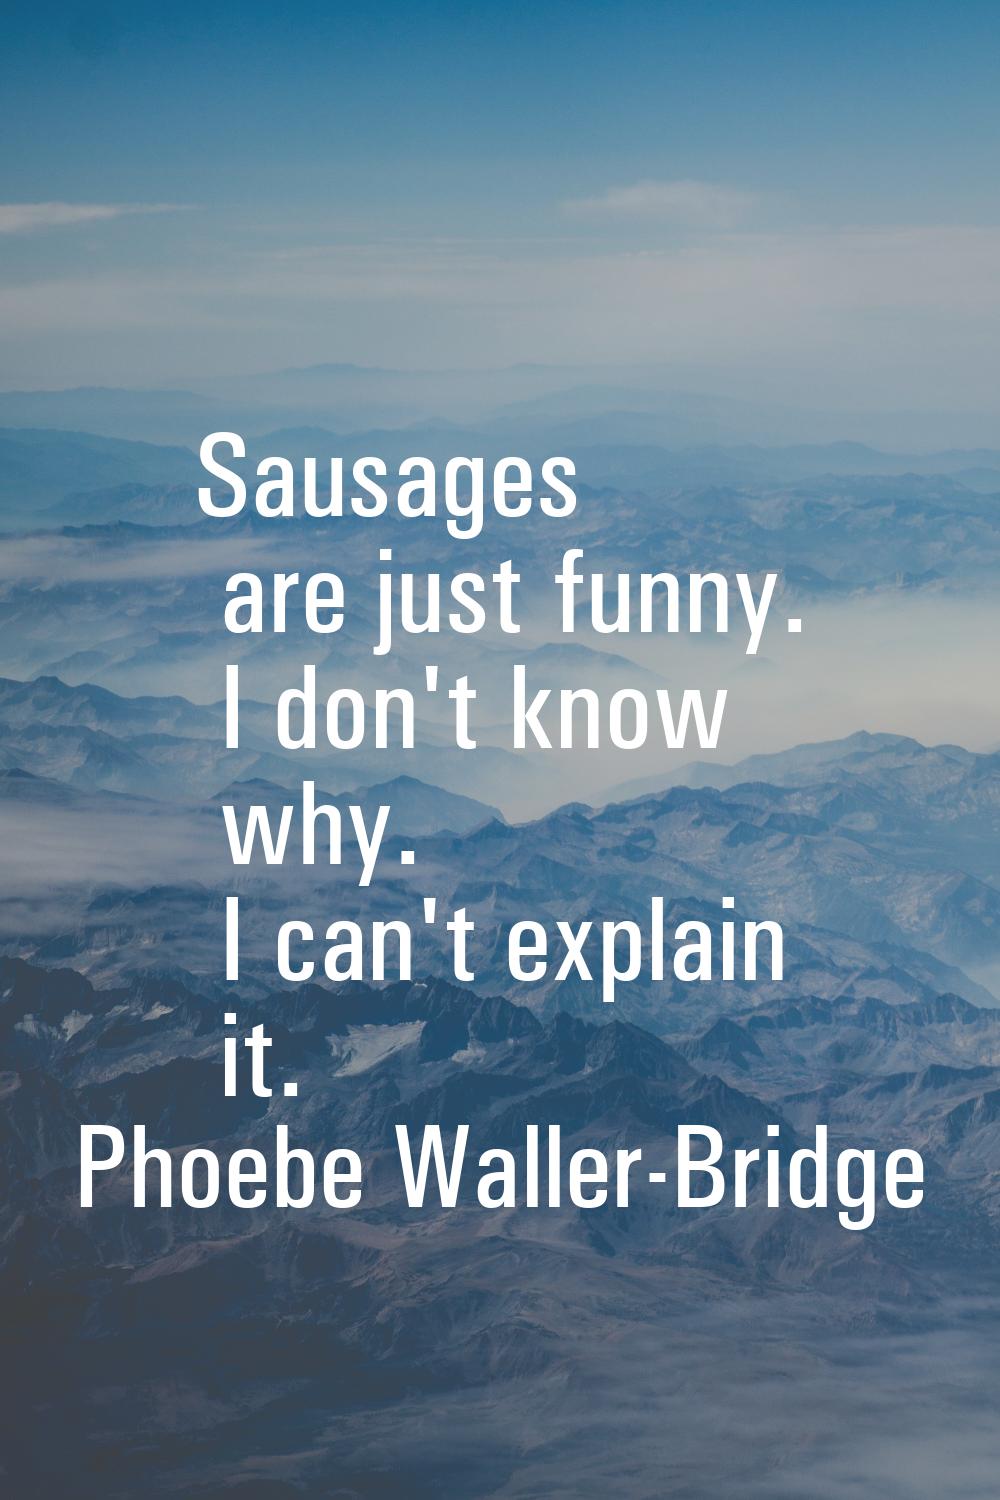 Sausages are just funny. I don't know why. I can't explain it.